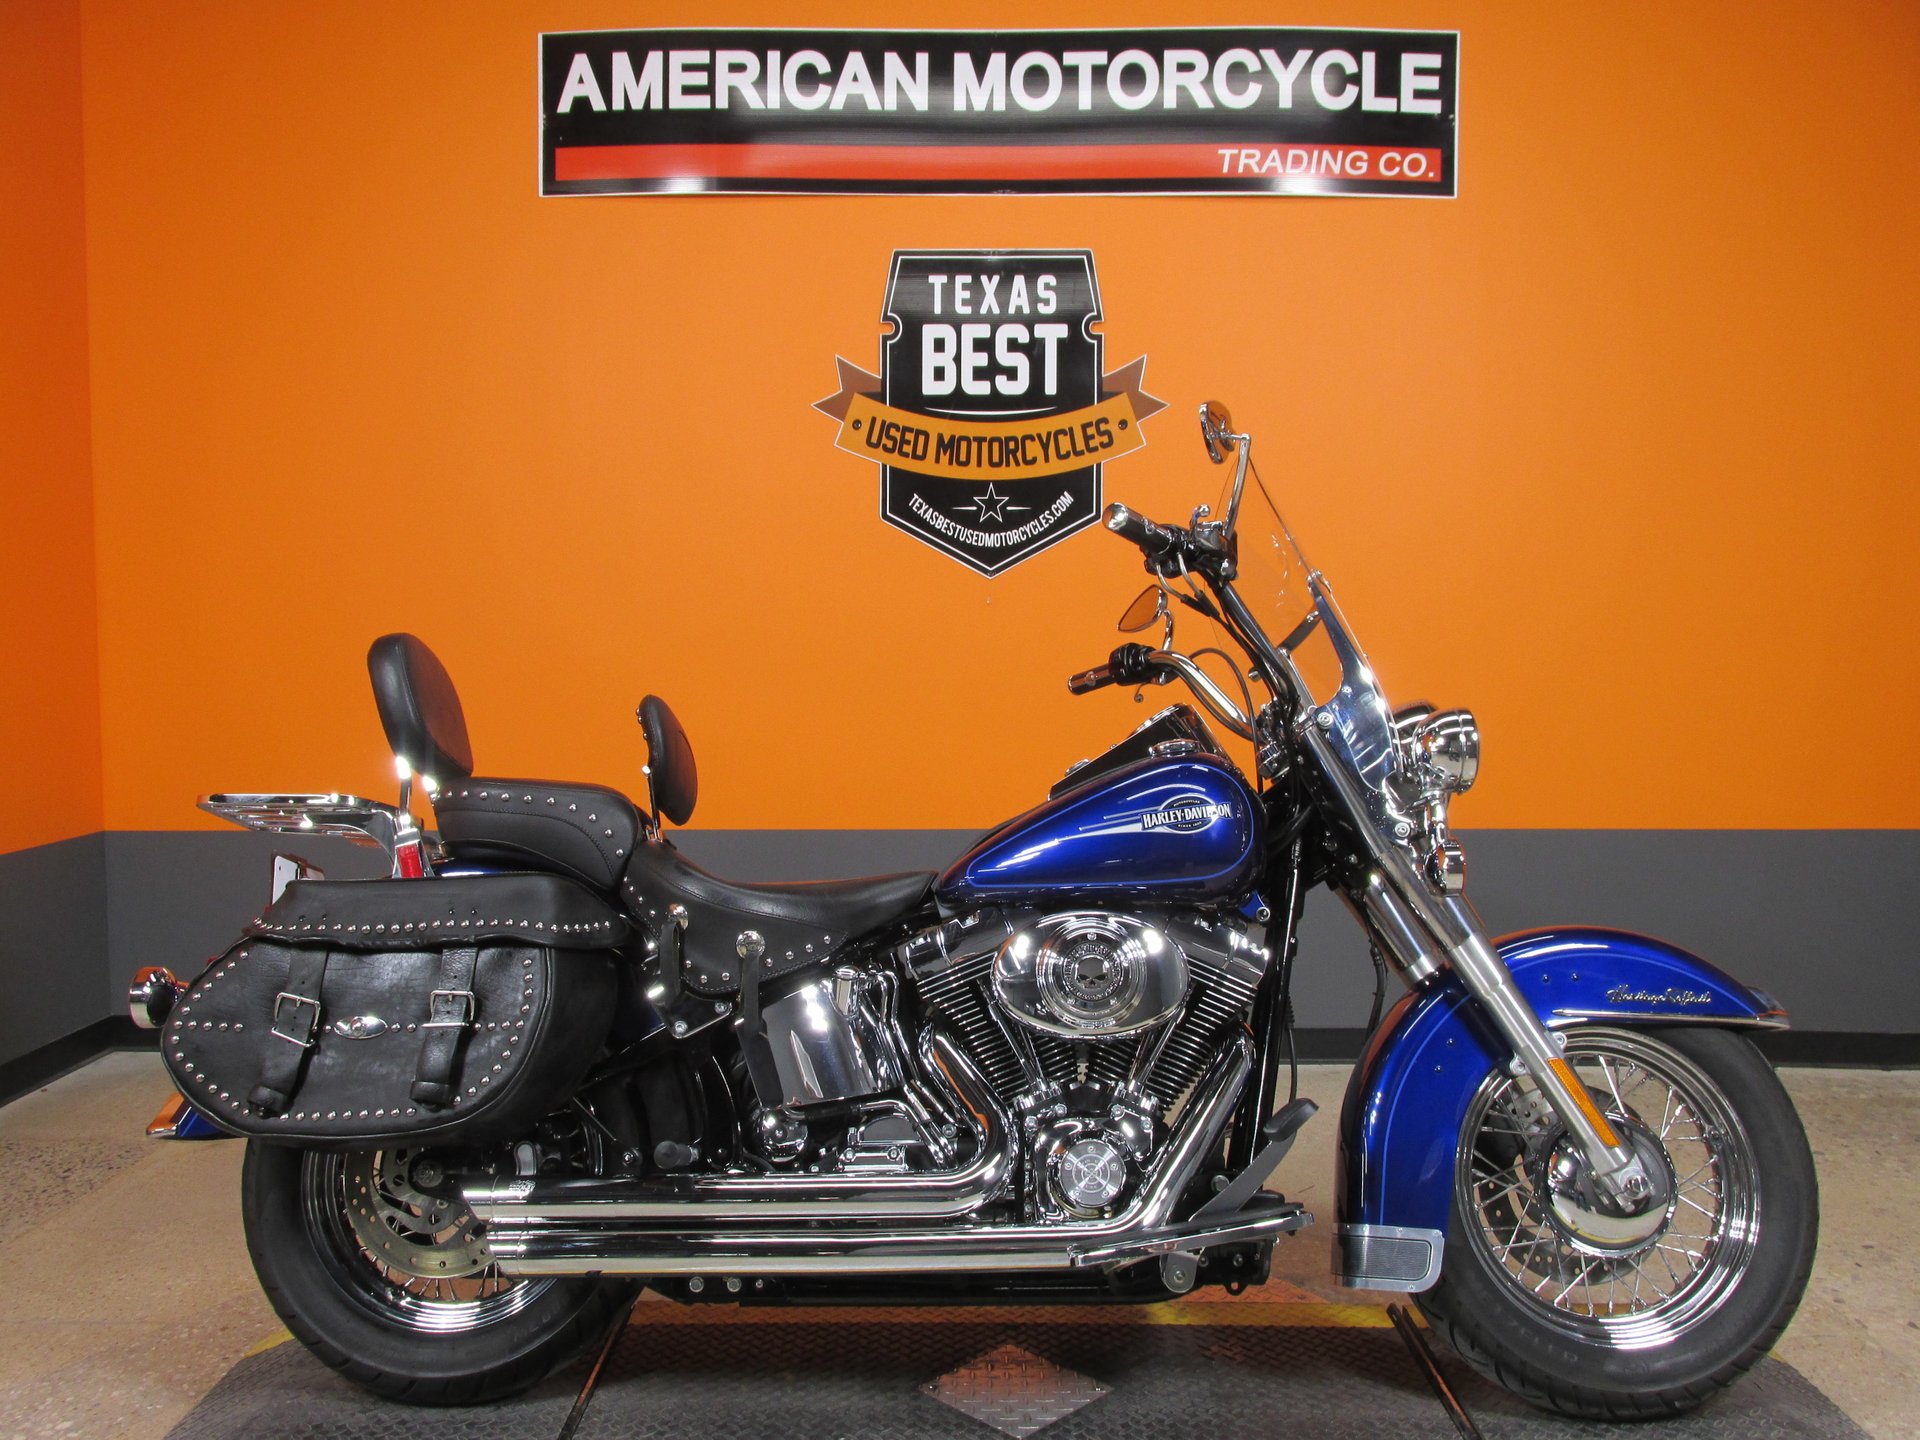 2006 Harley Davidson Softail Heritage Classic American Motorcycle Trading Company Used Harley Davidson Motorcycles